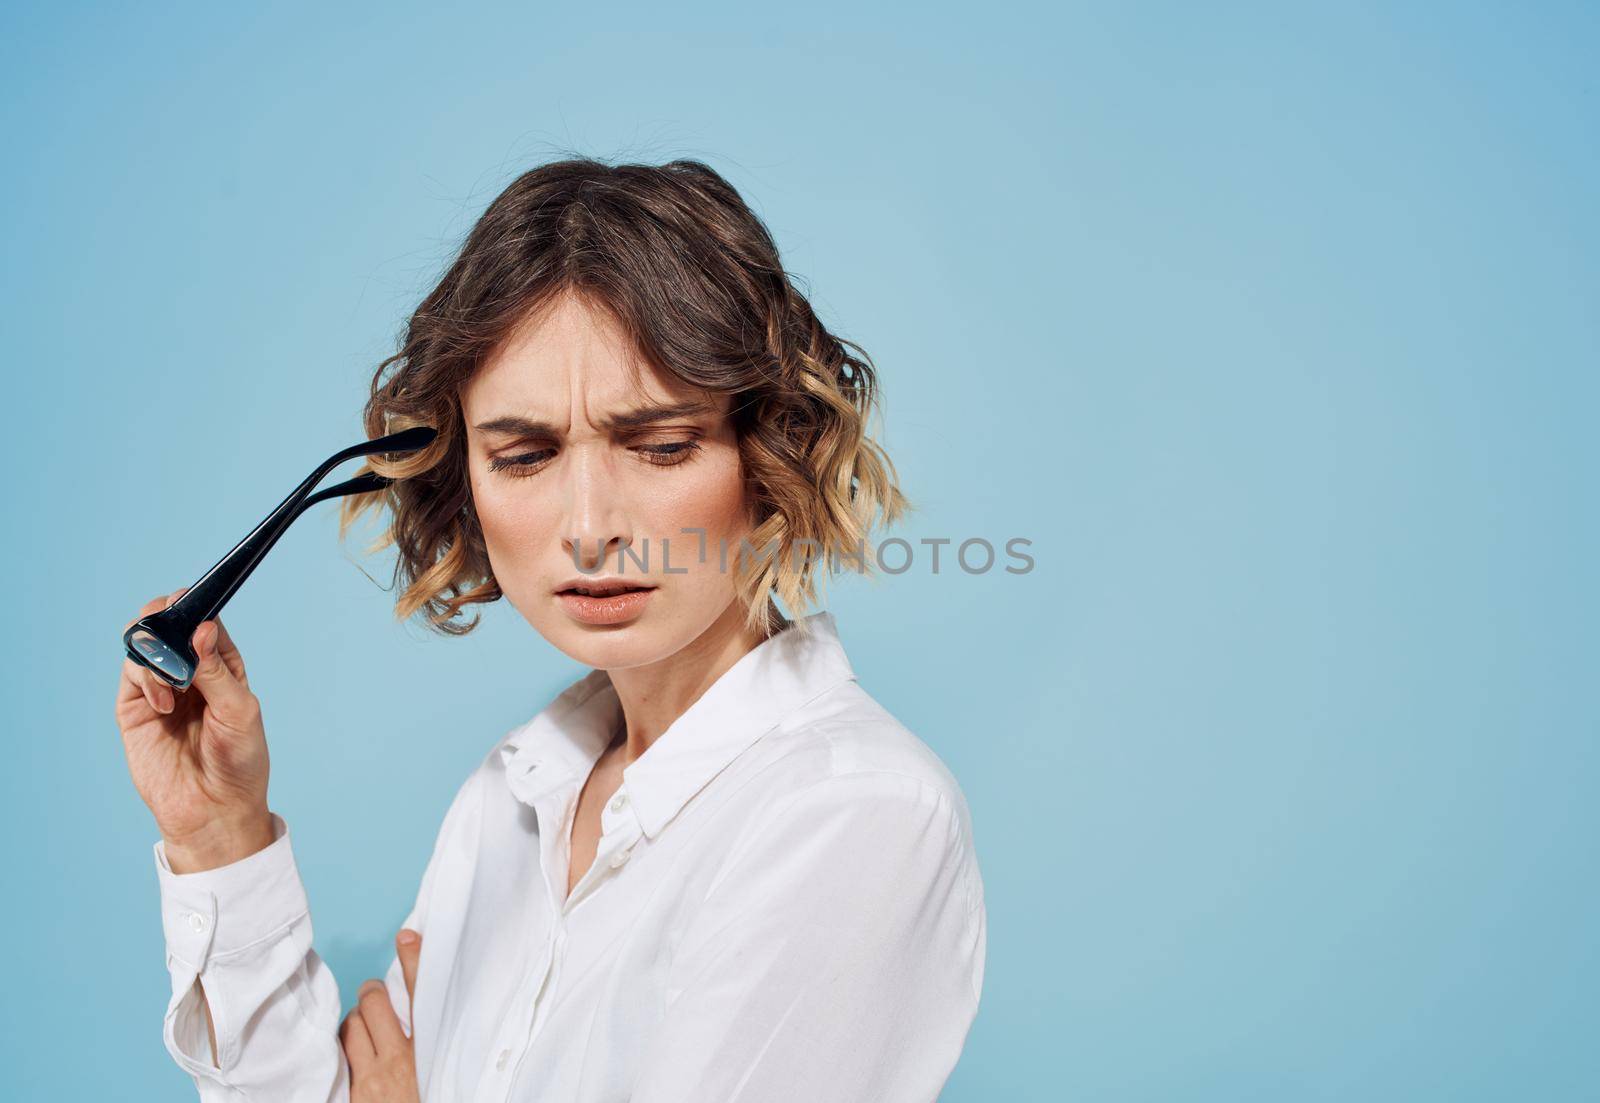 Fashionable woman in a light shirt with glasses in her hands on a blue background. High quality photo